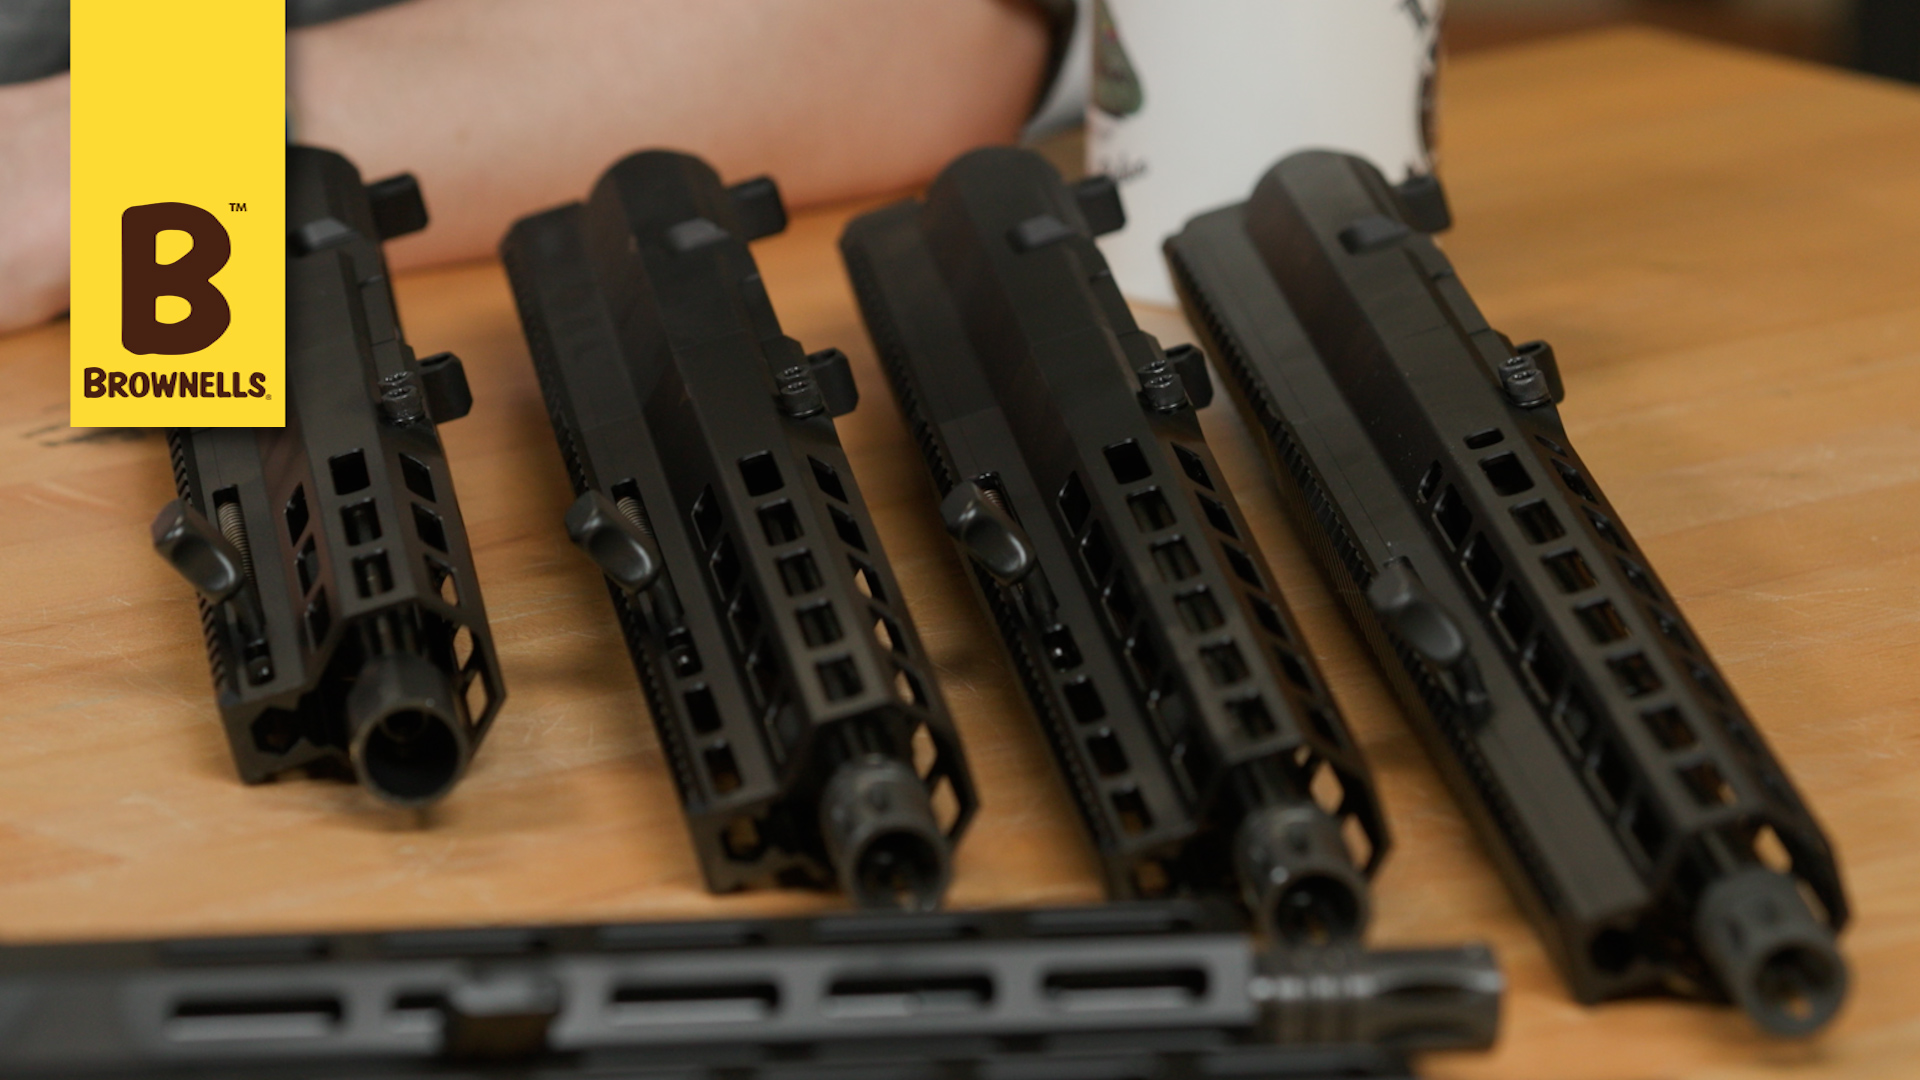 Product Spotlight: Foxtrot Mike Upper Receivers